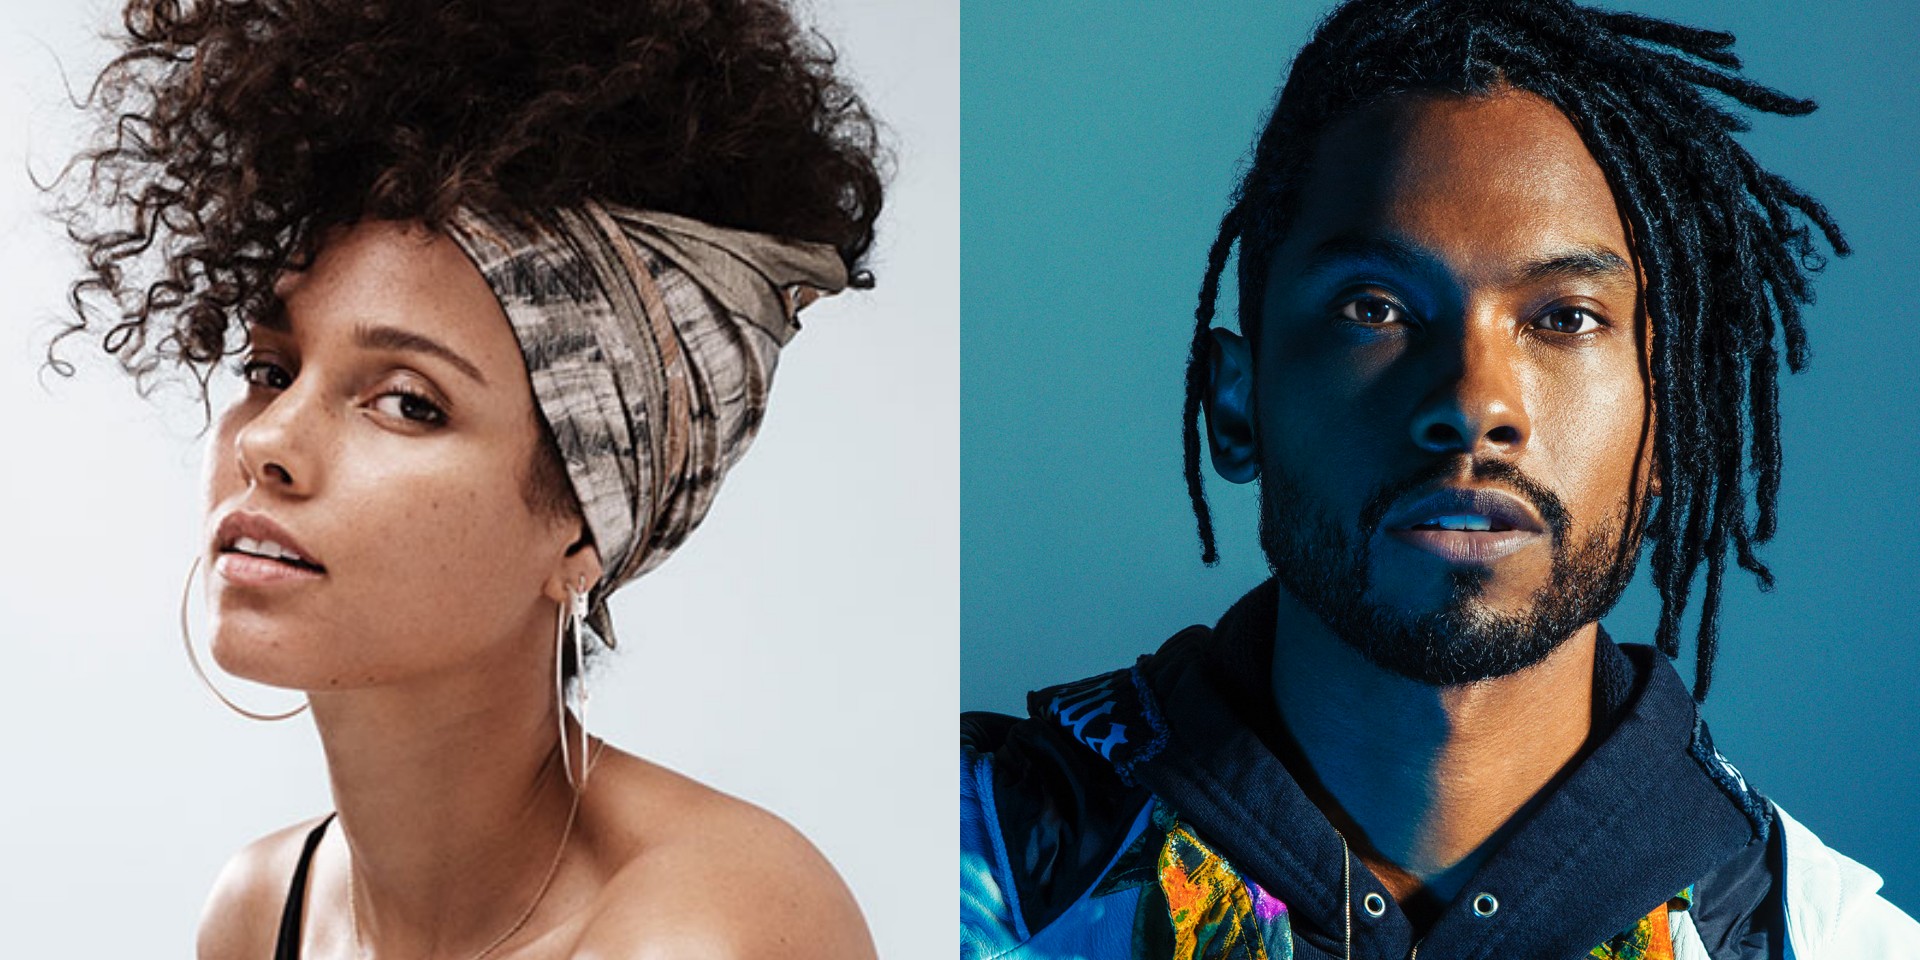 Alicia Keys and Miguel release tender new song ‘Show Me Love’ with music video 